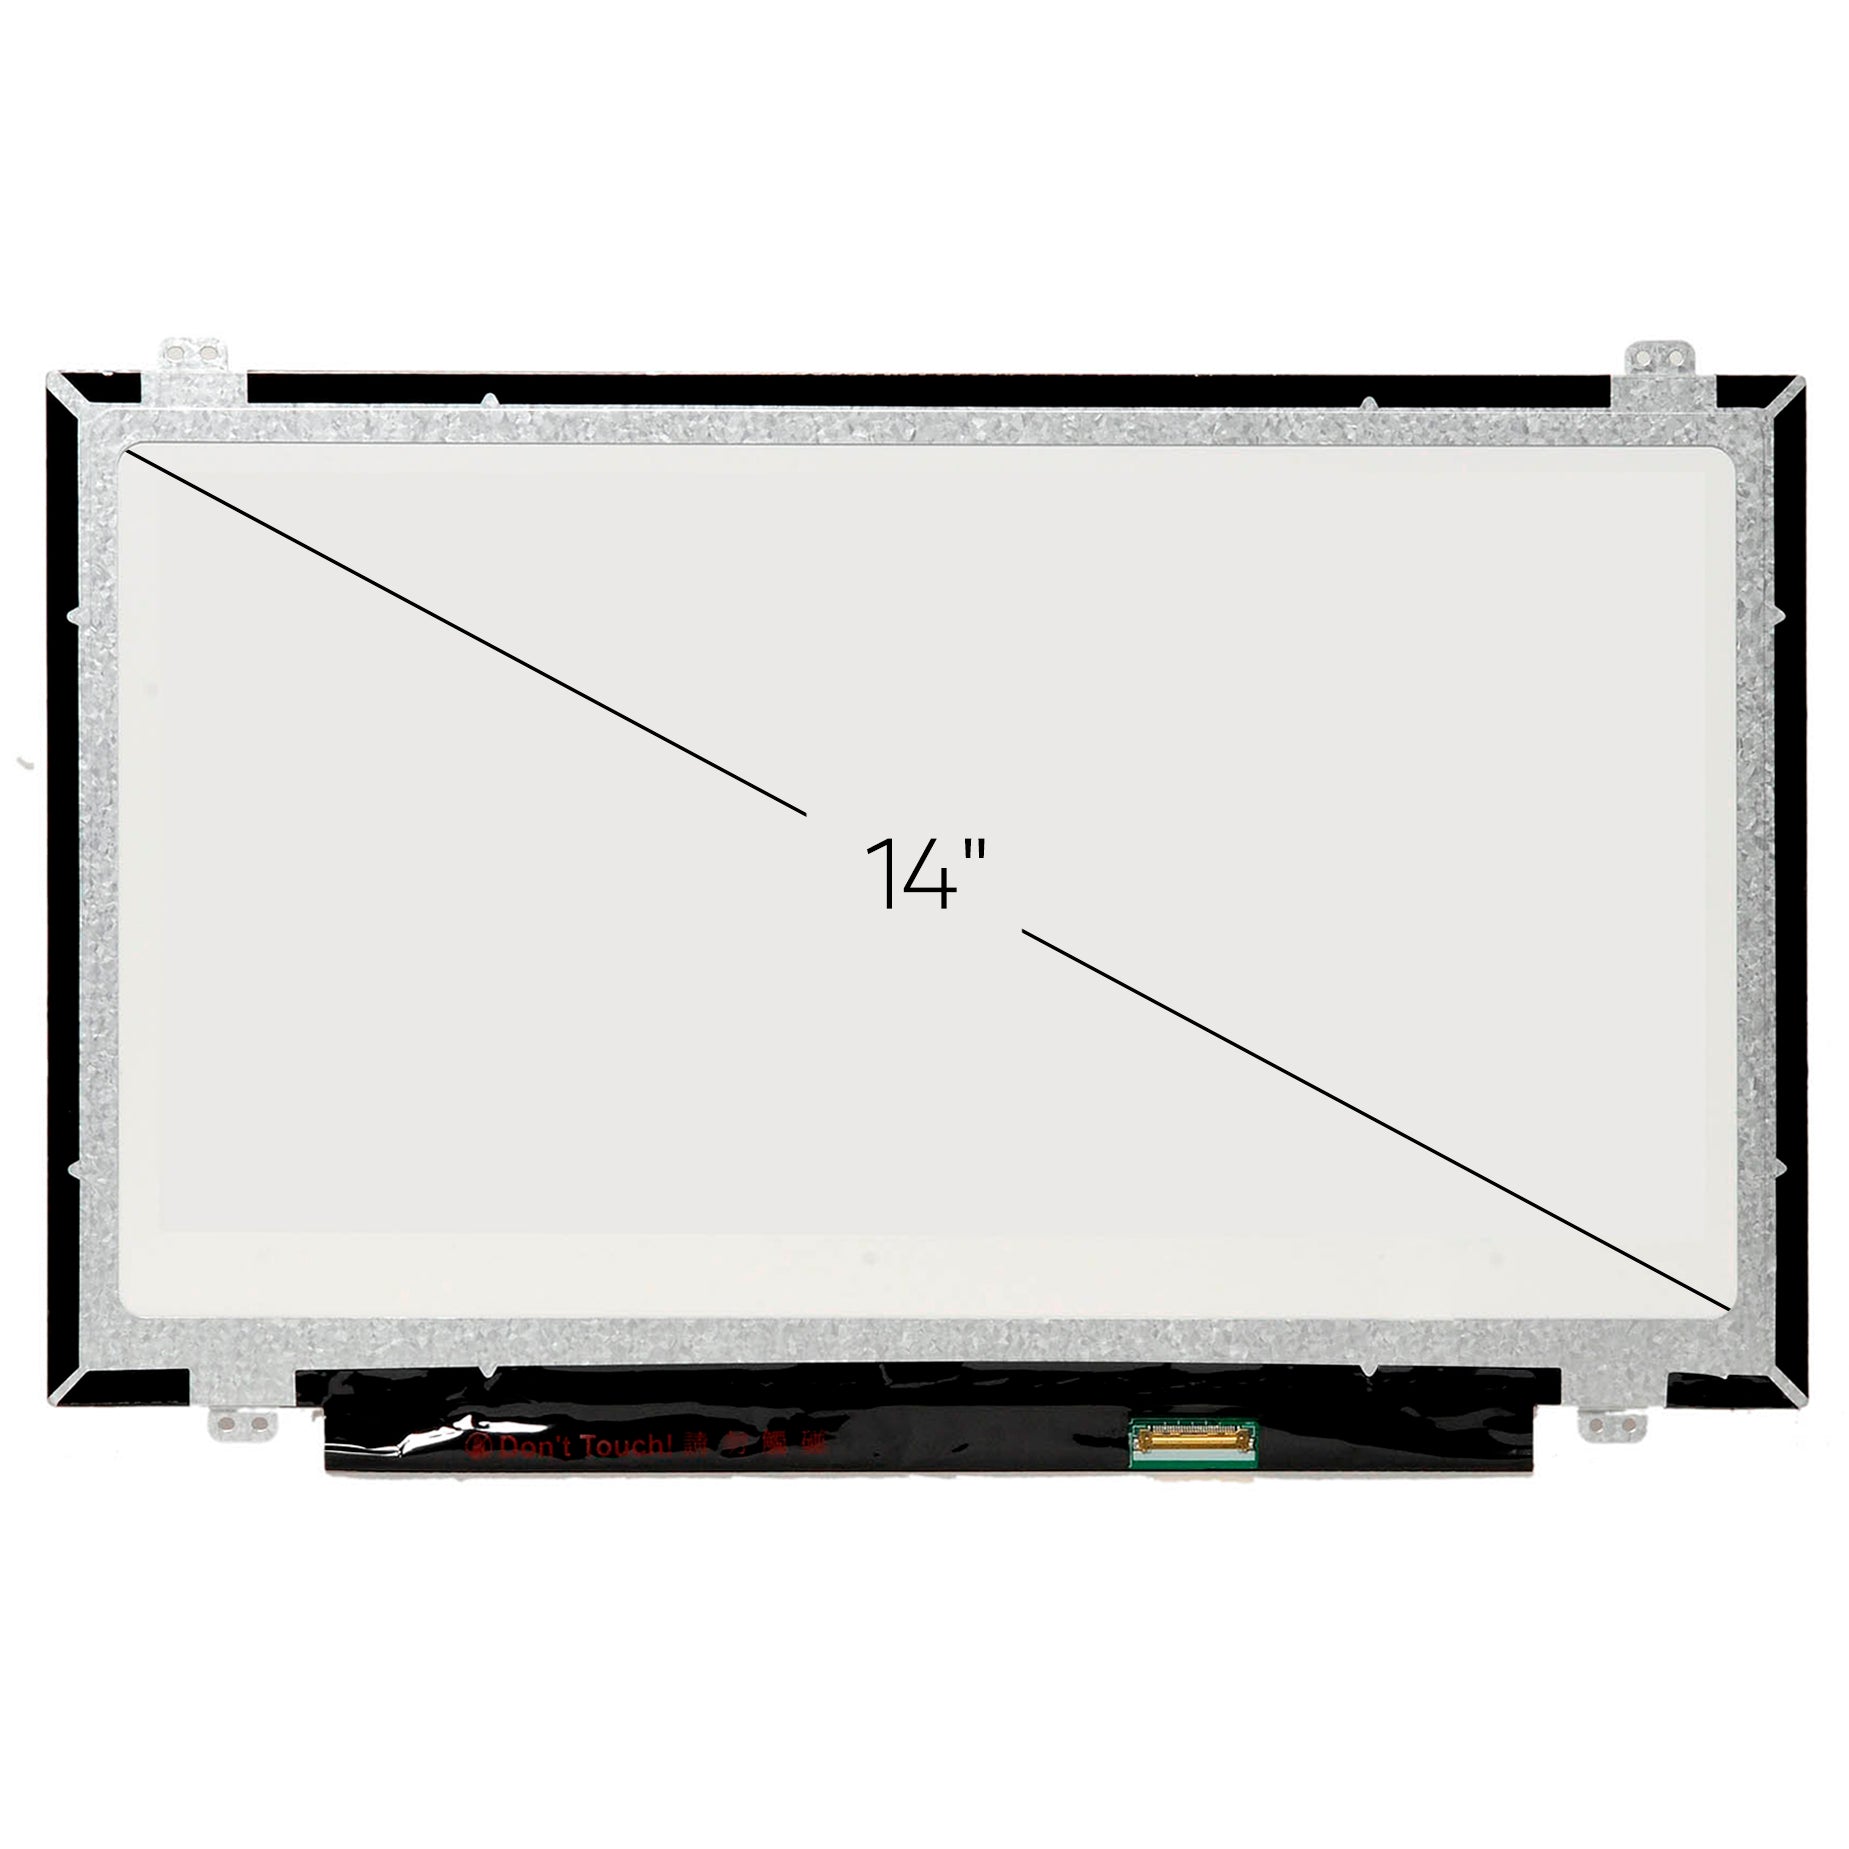 Screen Replacement for Dell Inspiron 3442 HD 1366x768 Glossy LCD LED Display